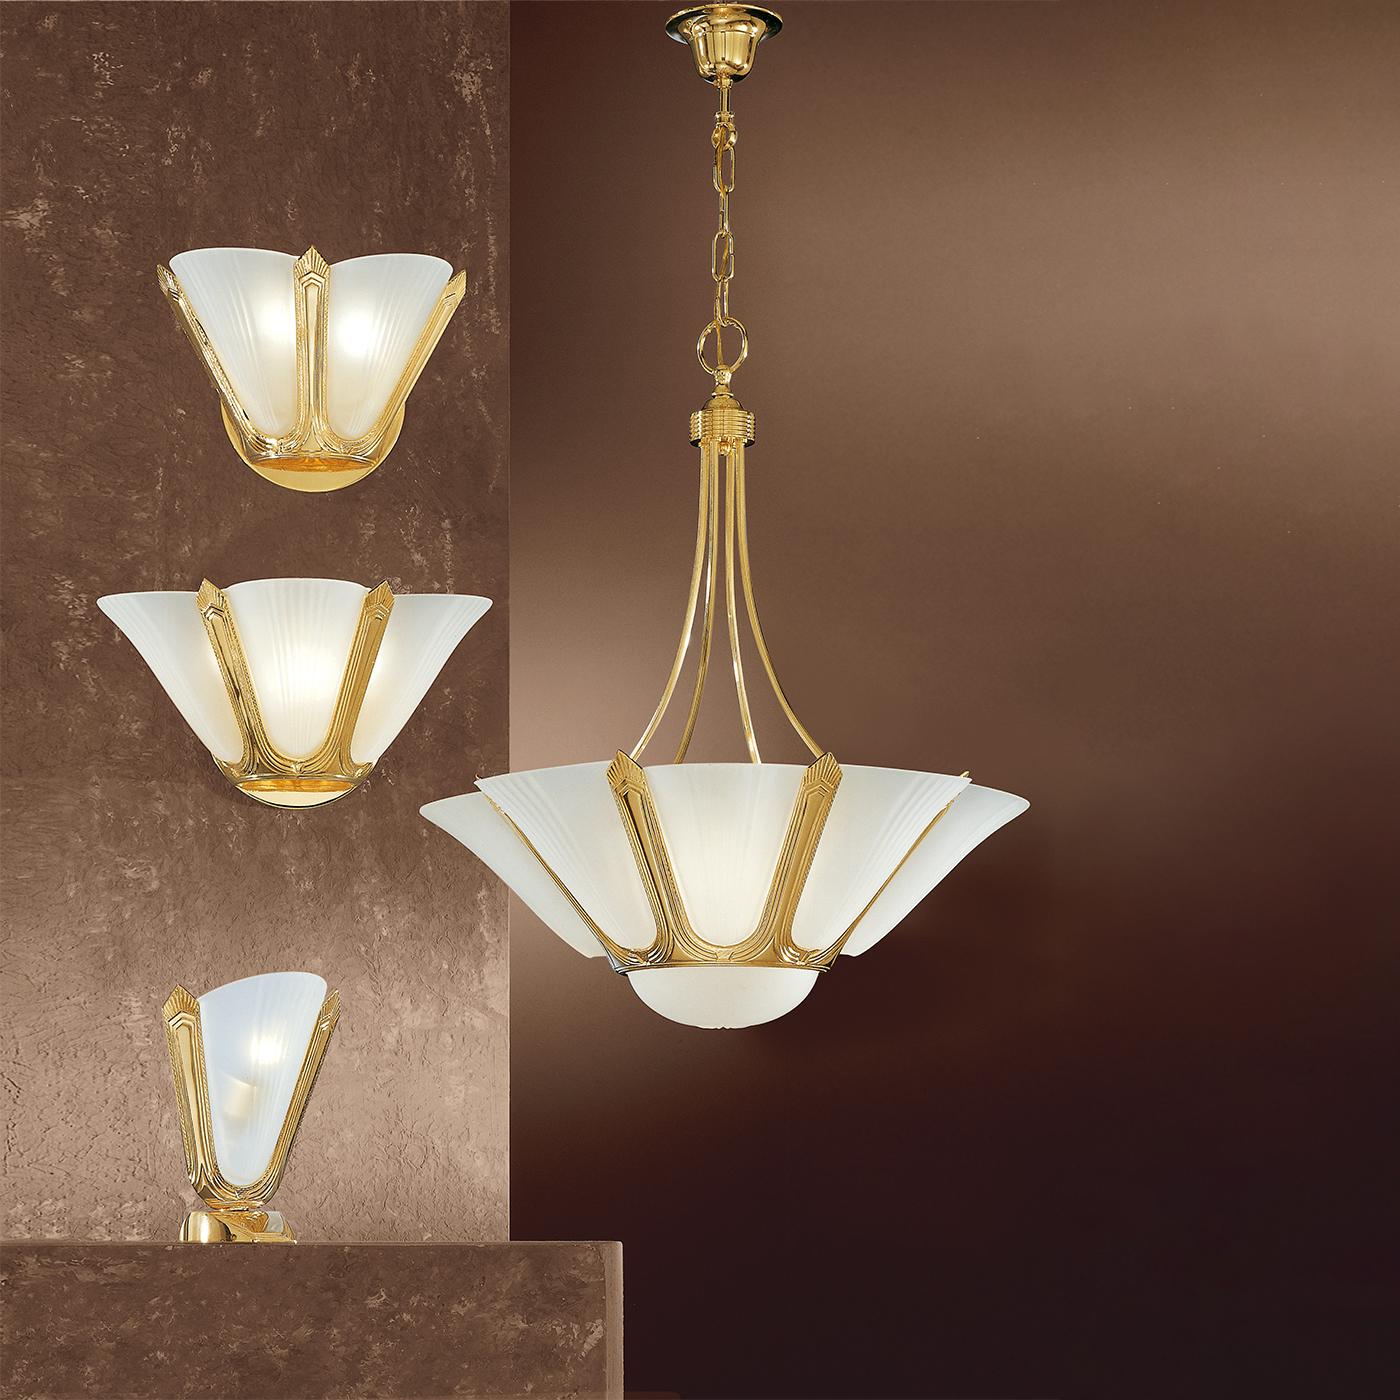 A stunning lighting fixture incorporating refined Art-Deco accents, this wall lamp is a showcase of opulence and craftsmanship. The glistening pure gold structure, etched with minute etched patterns, welcomes a couple of fan-like satin glass